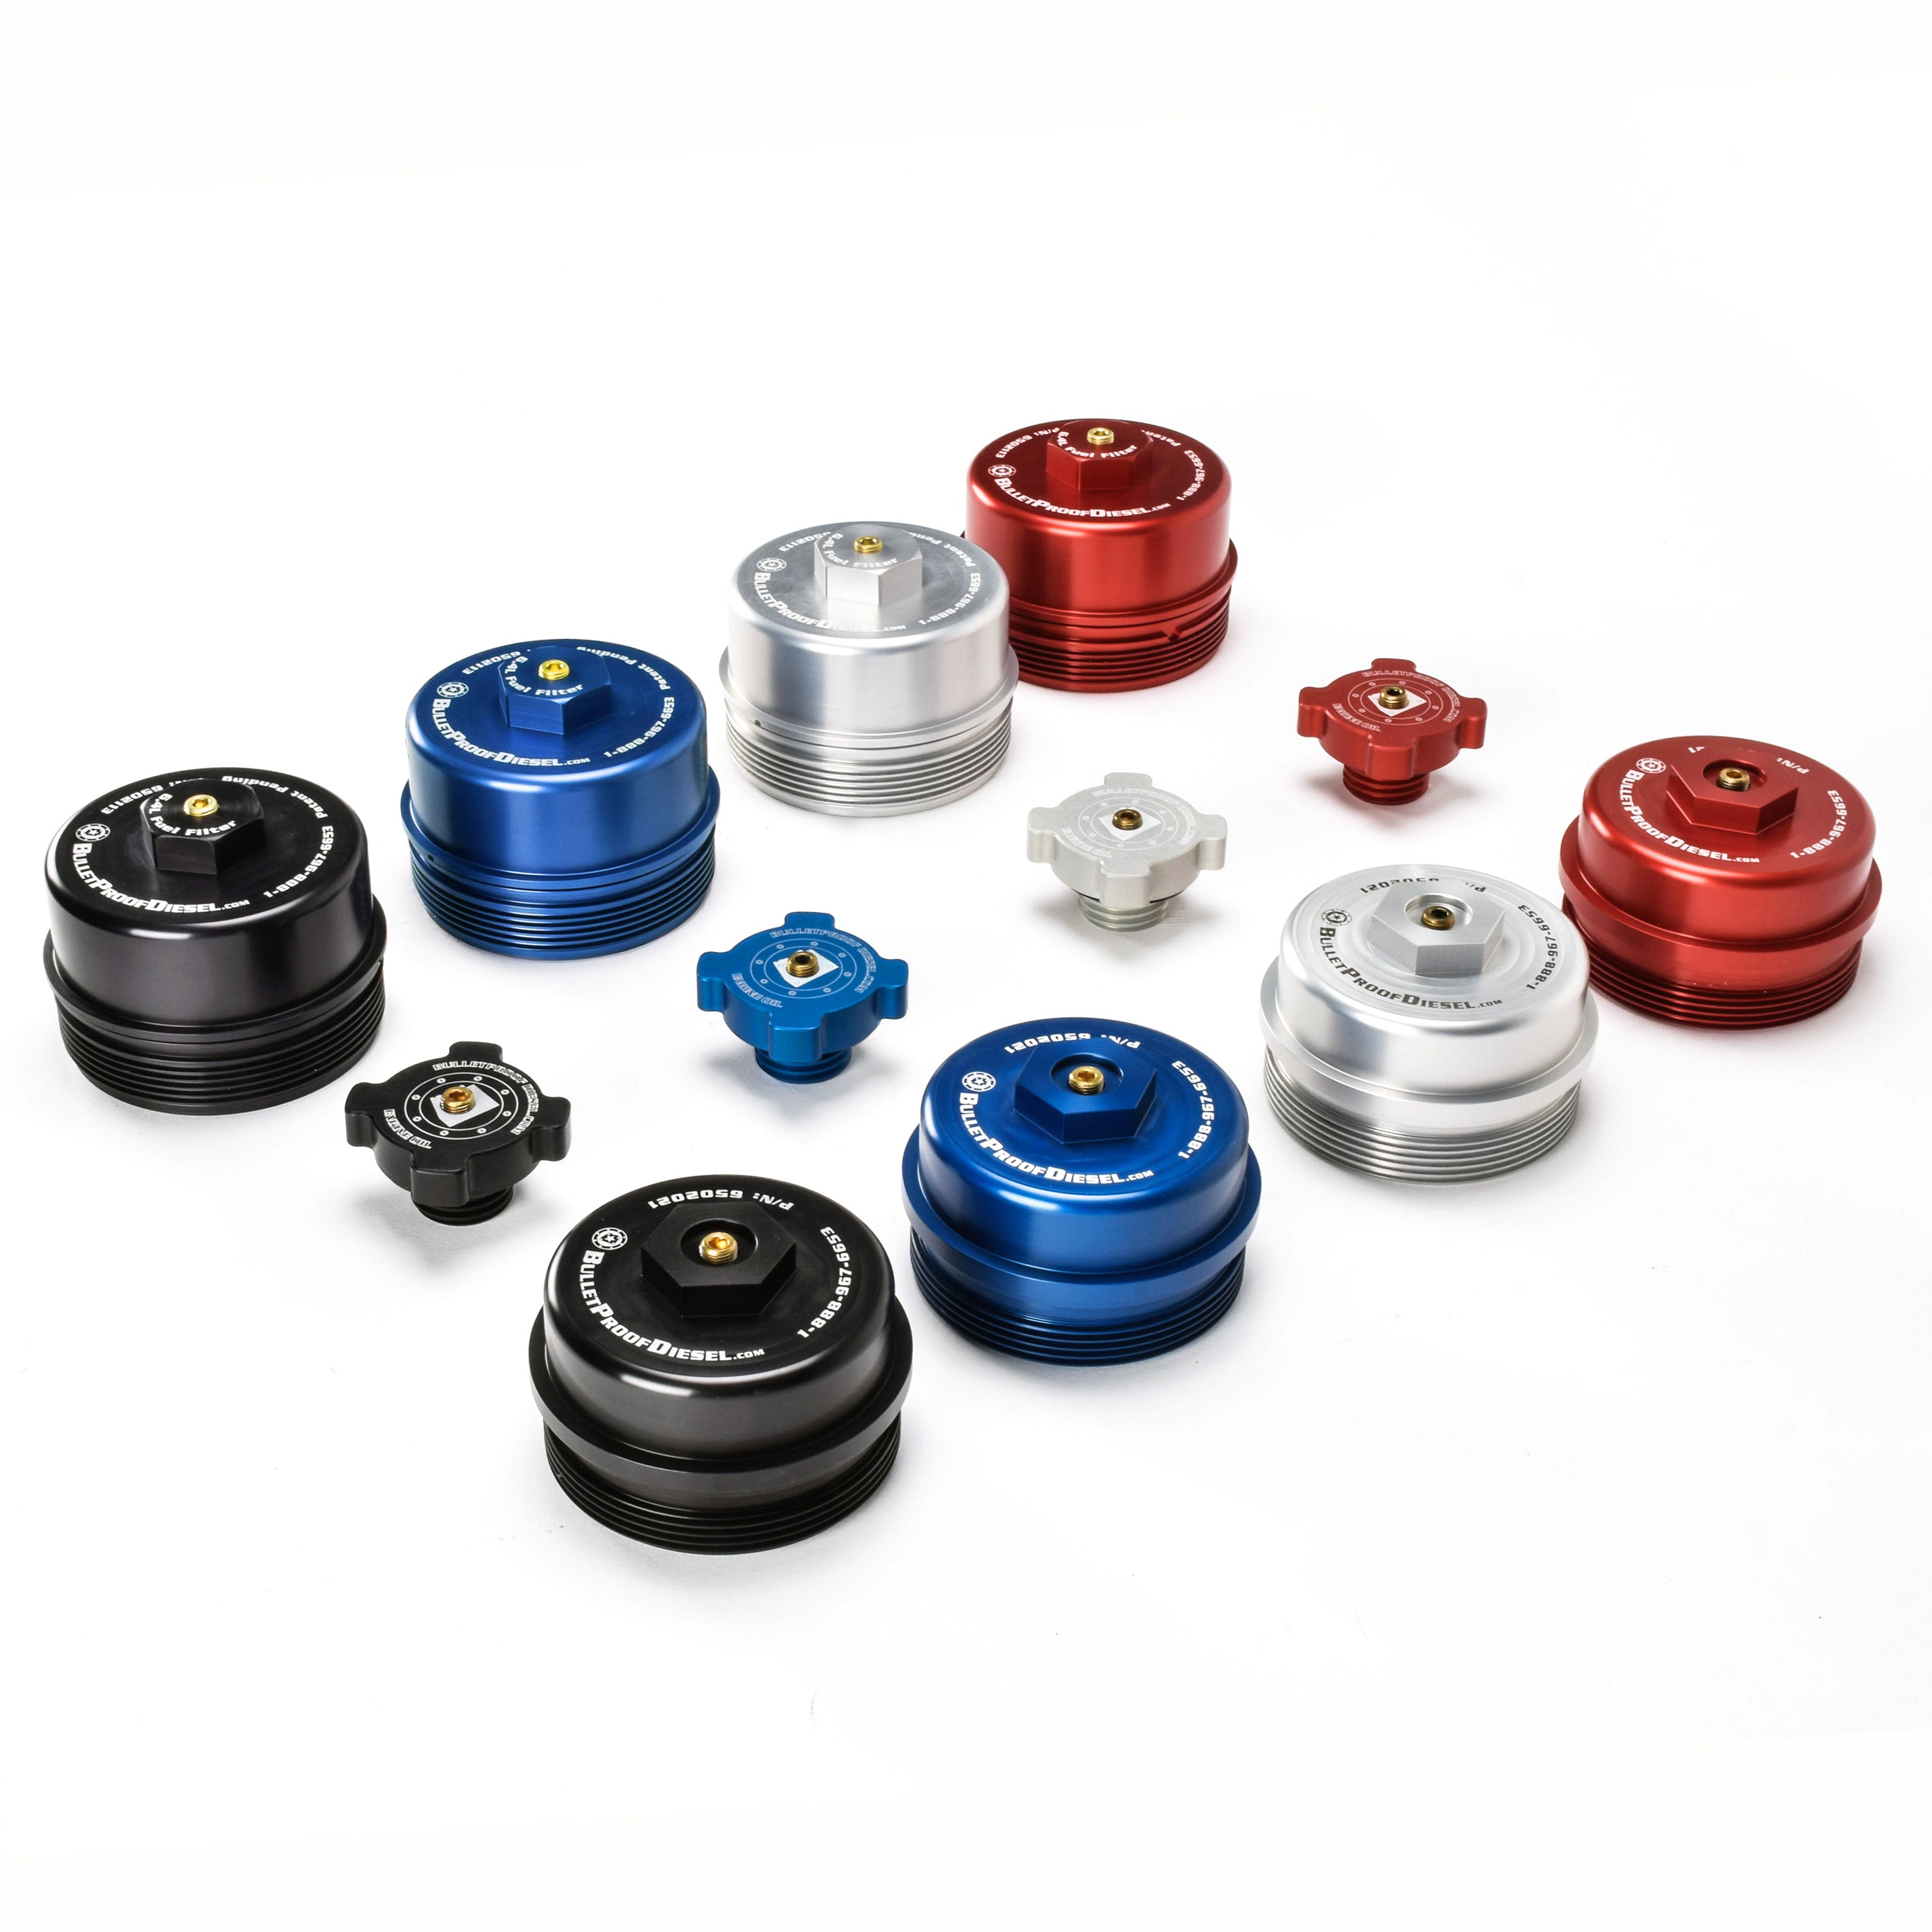 Upgraded Direct Fit Anodized Billet Aluminum Oil Filter, Oil Fill, and Lower Fuel Rail Cap Set for the Ford Power Stroke 6.4L Diesel with 1/8” MPT Threaded Port. Fits Years 2008 2009 2010. Available in Black, Blue, Red, Clear (Natural)